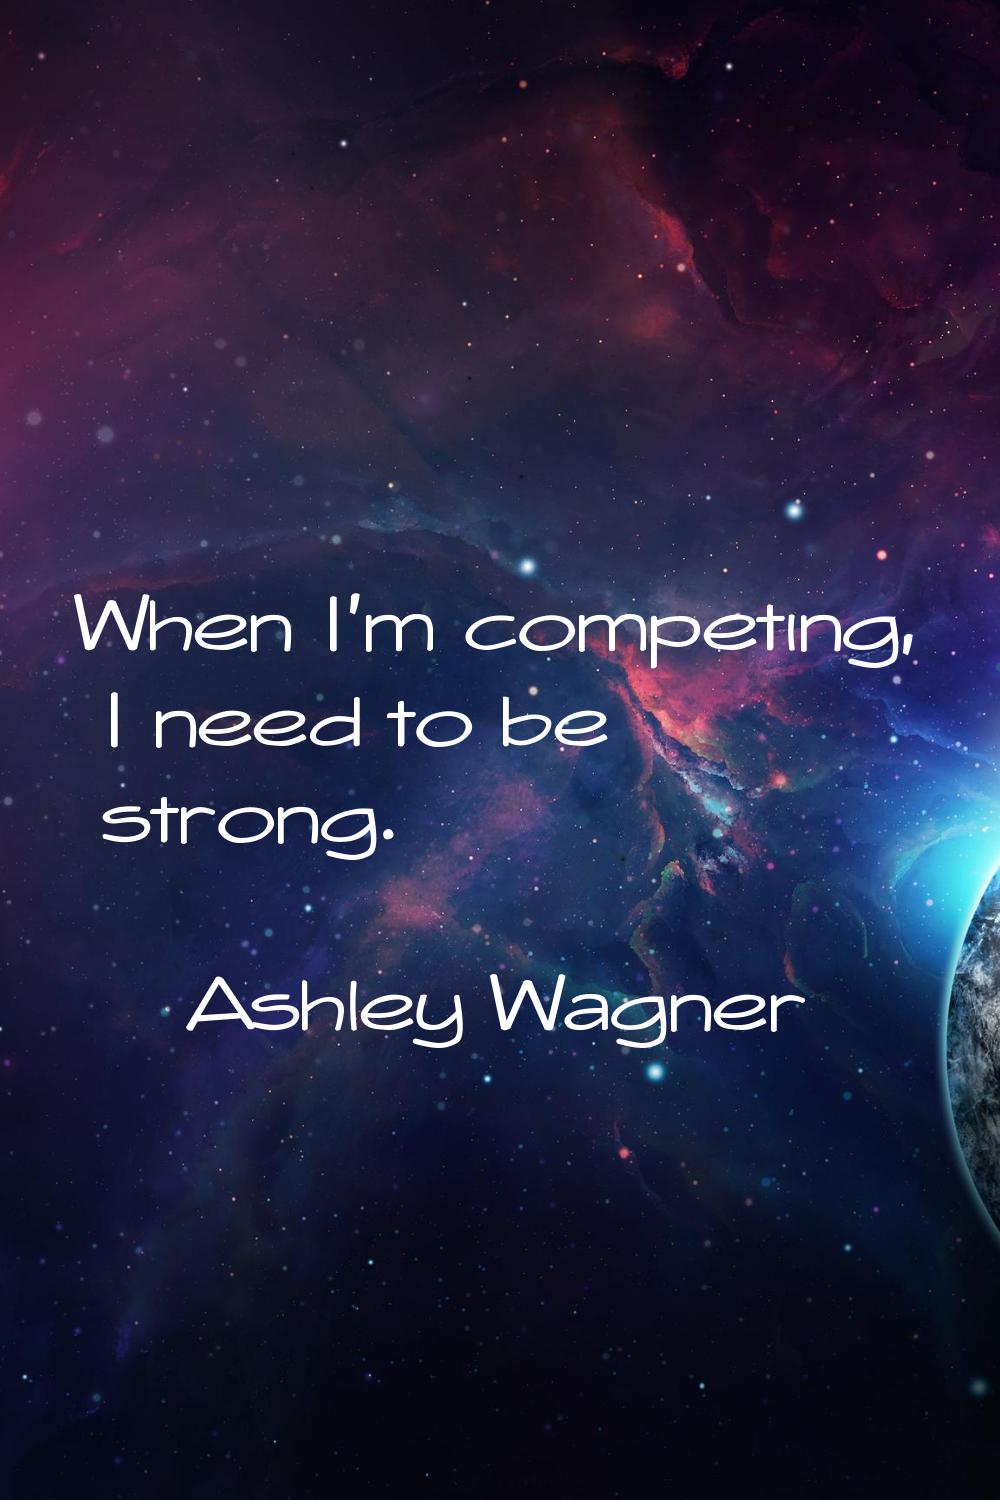 When I'm competing, I need to be strong.